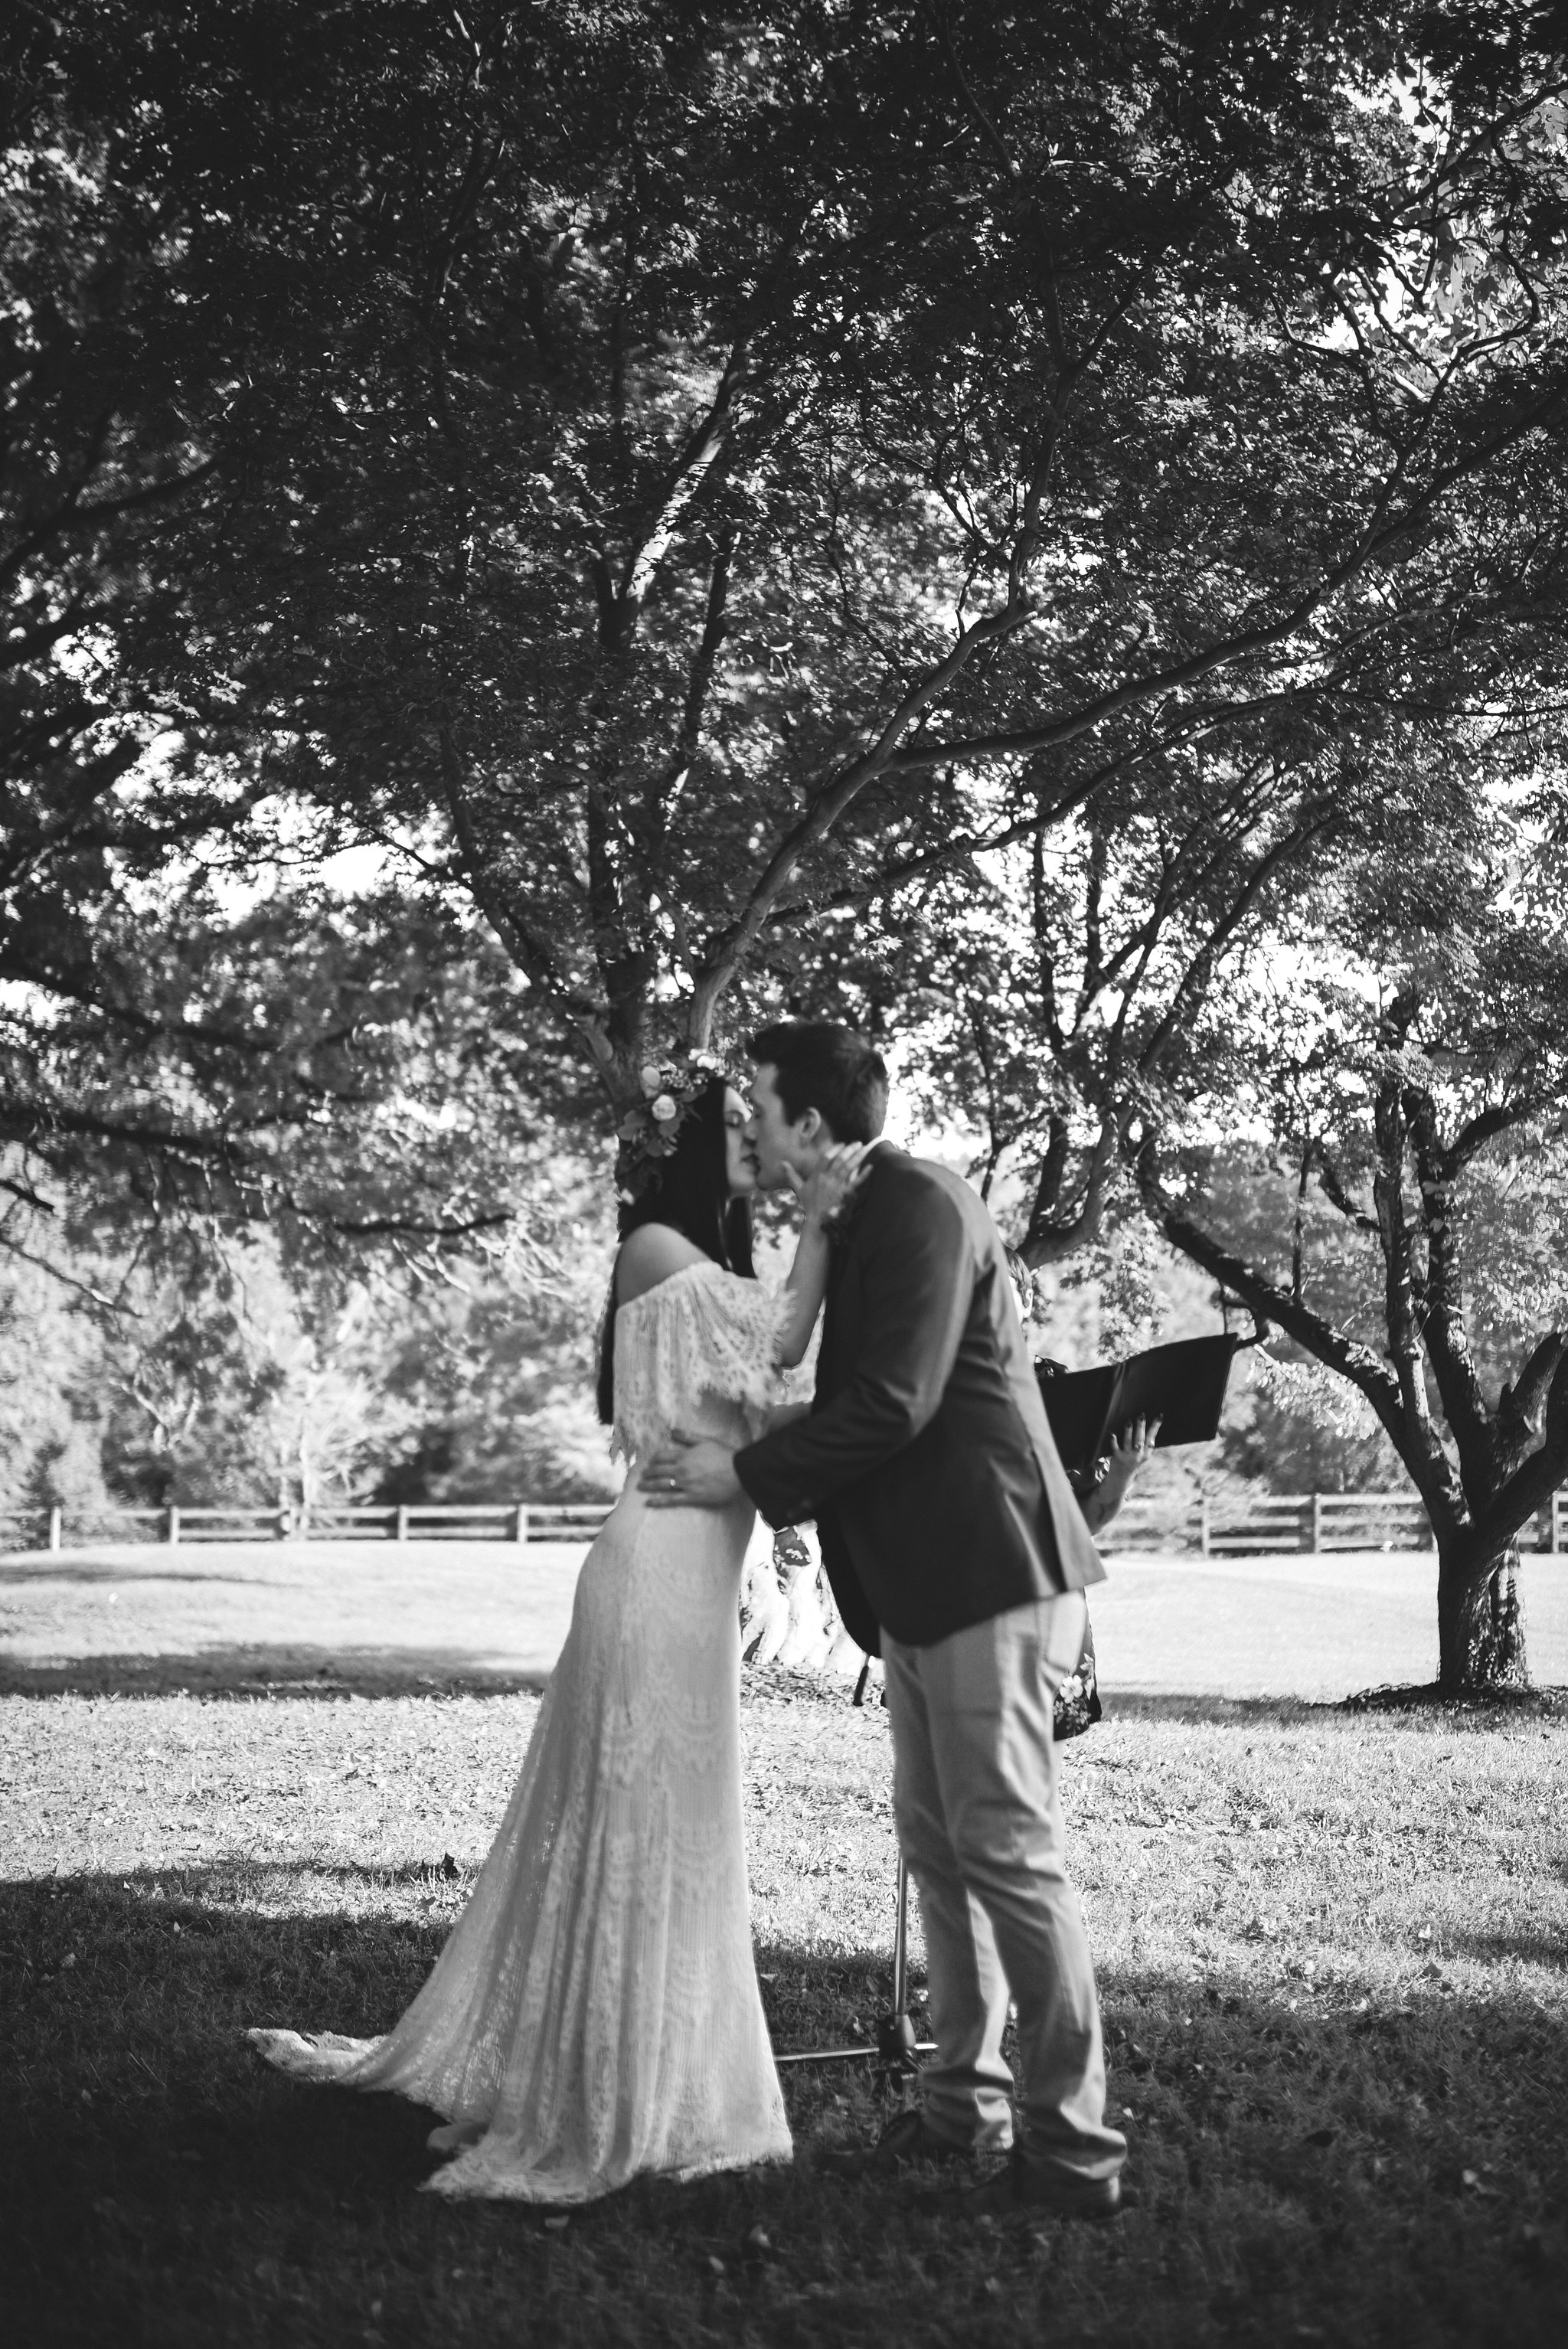  Maryland, Eastern Shore, Baltimore Wedding Photographer, Romantic, Boho, Backyard Wedding, Nature, Black and White Photo, First Kiss, Bride and Groom Share First Kiss 